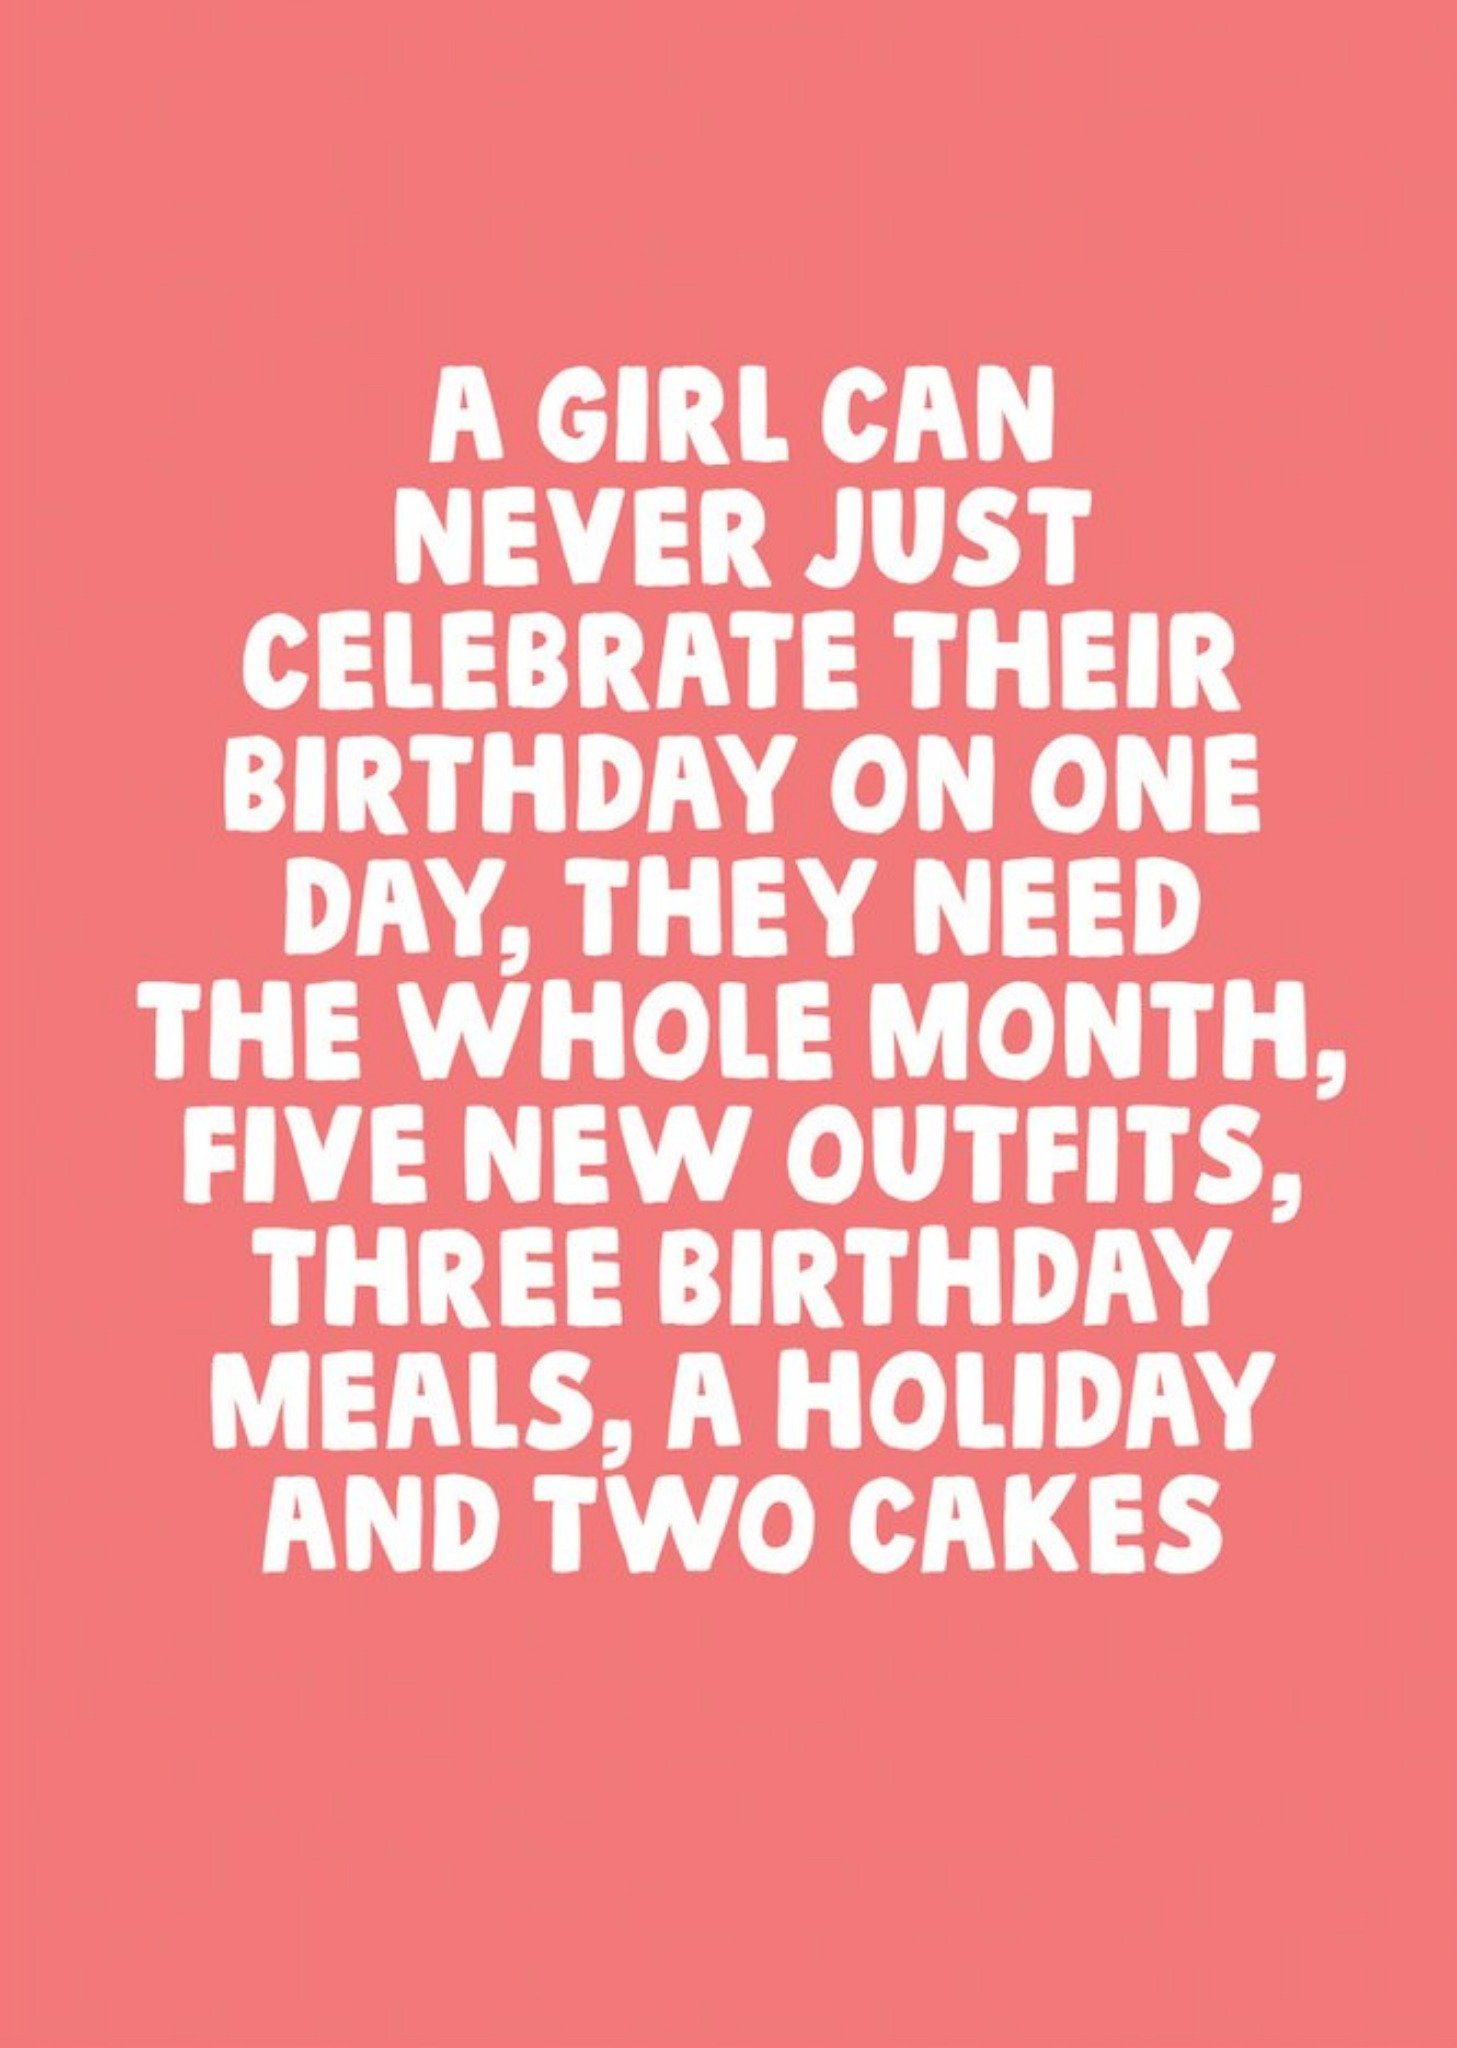 Moonpig Funny A Girl Can Never Just Celebrate Their Birthday On One Day Card, Large